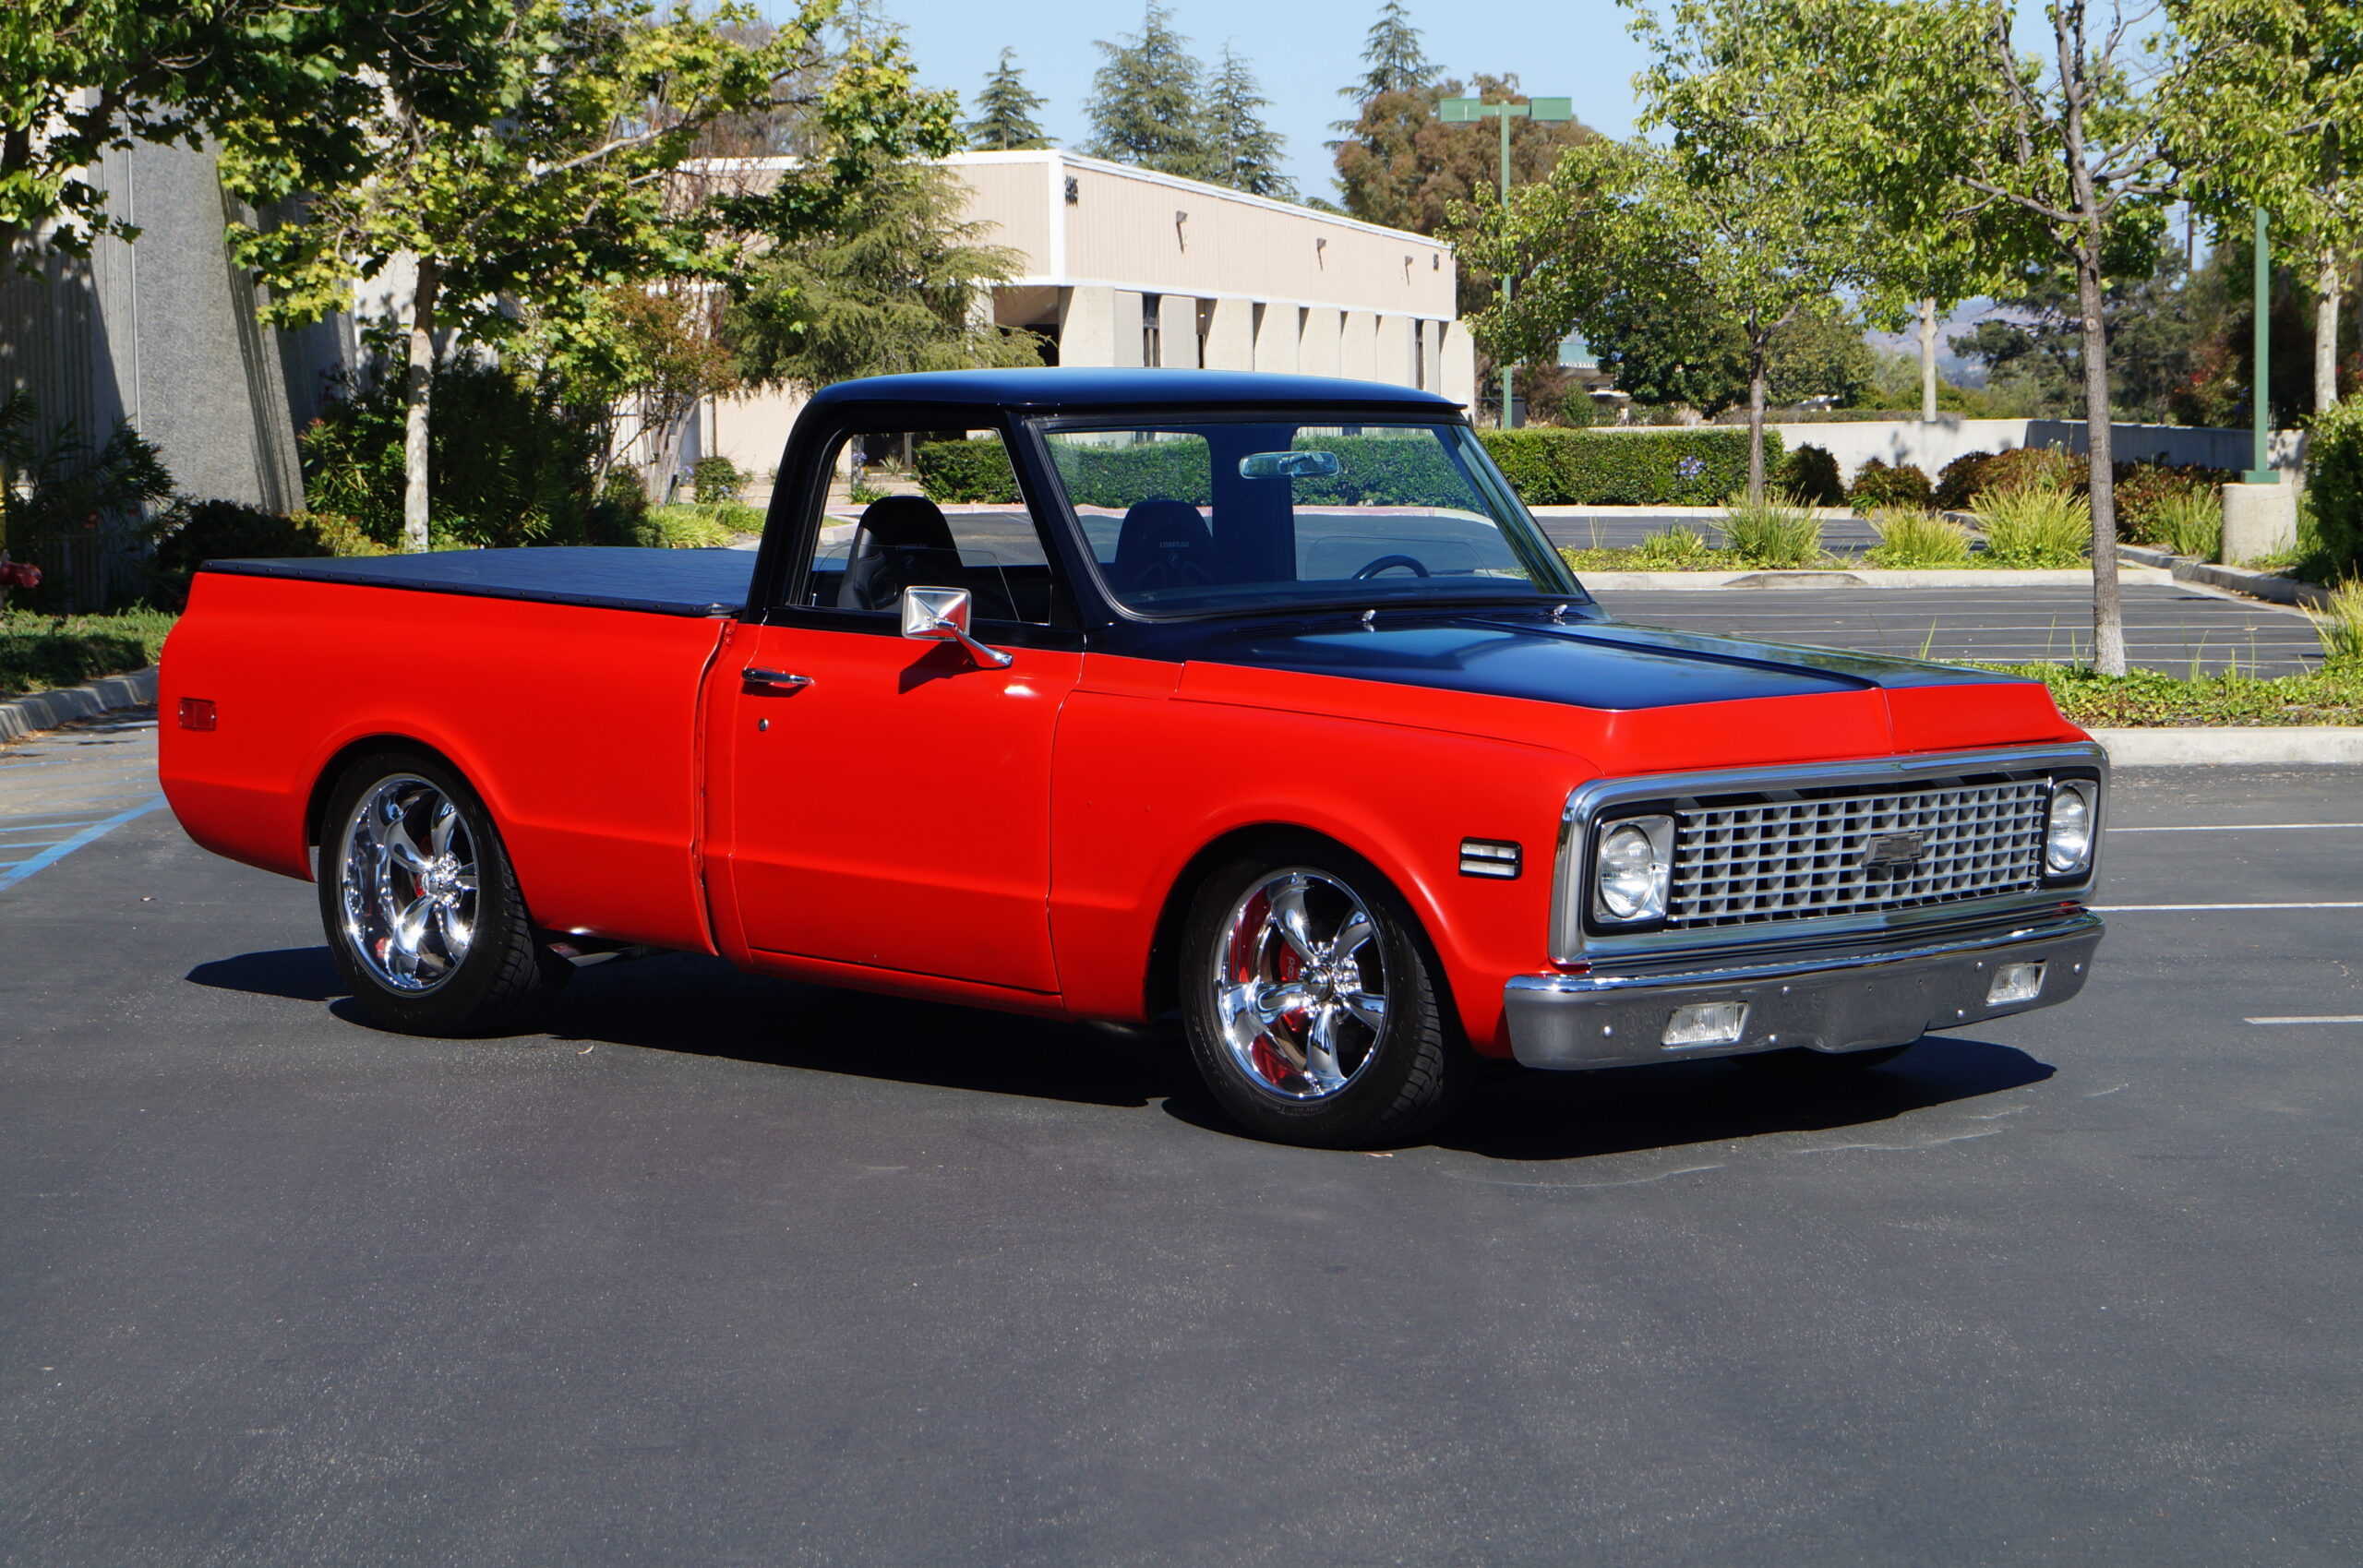 Red and Black 1972 Chevrolet C10 Truck - Sold at Johnston Motorsports